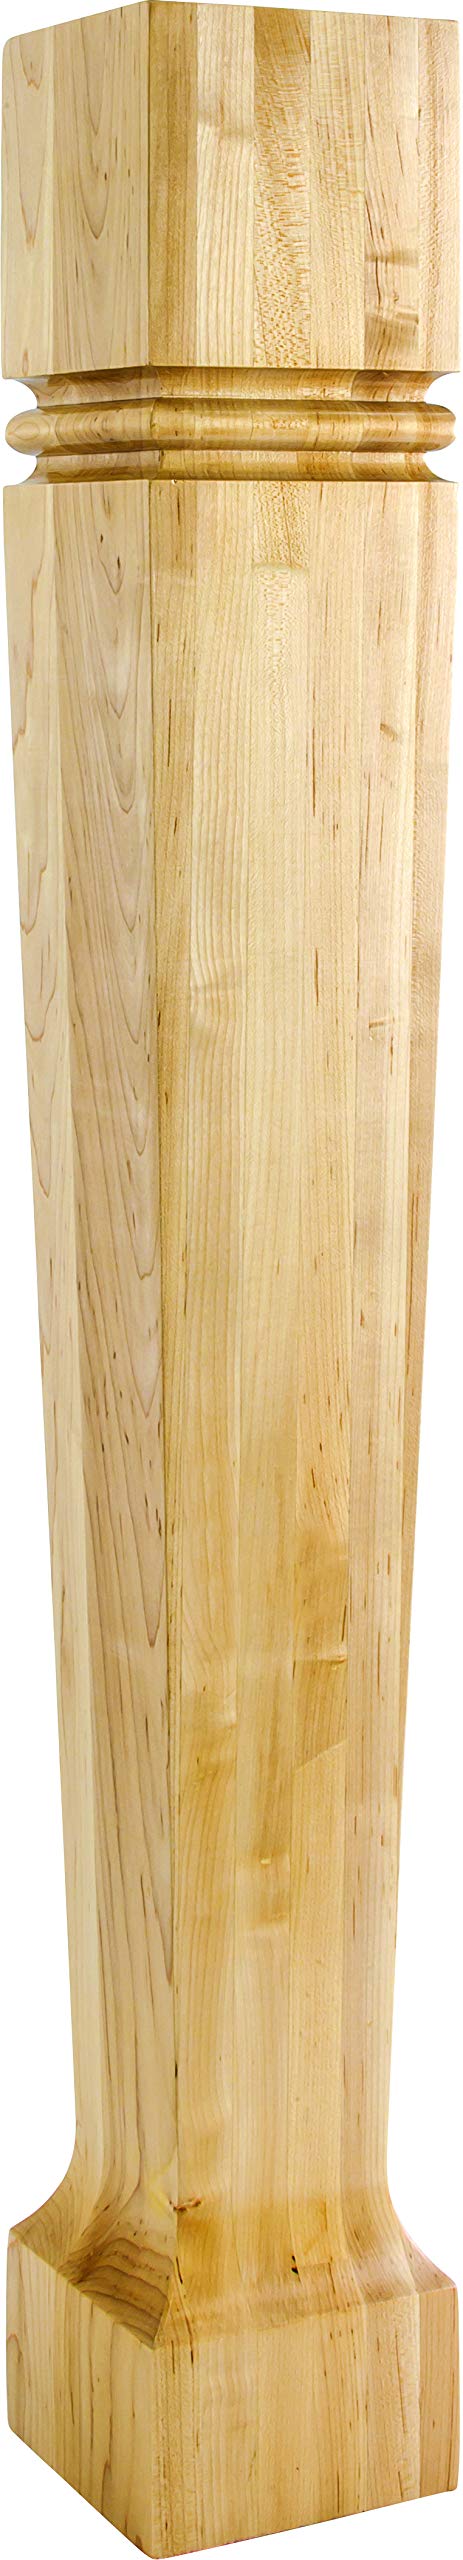 Hardware Resources P78-5-42-CH 5" W x 5" D x 42" H Cherry Scooped Post